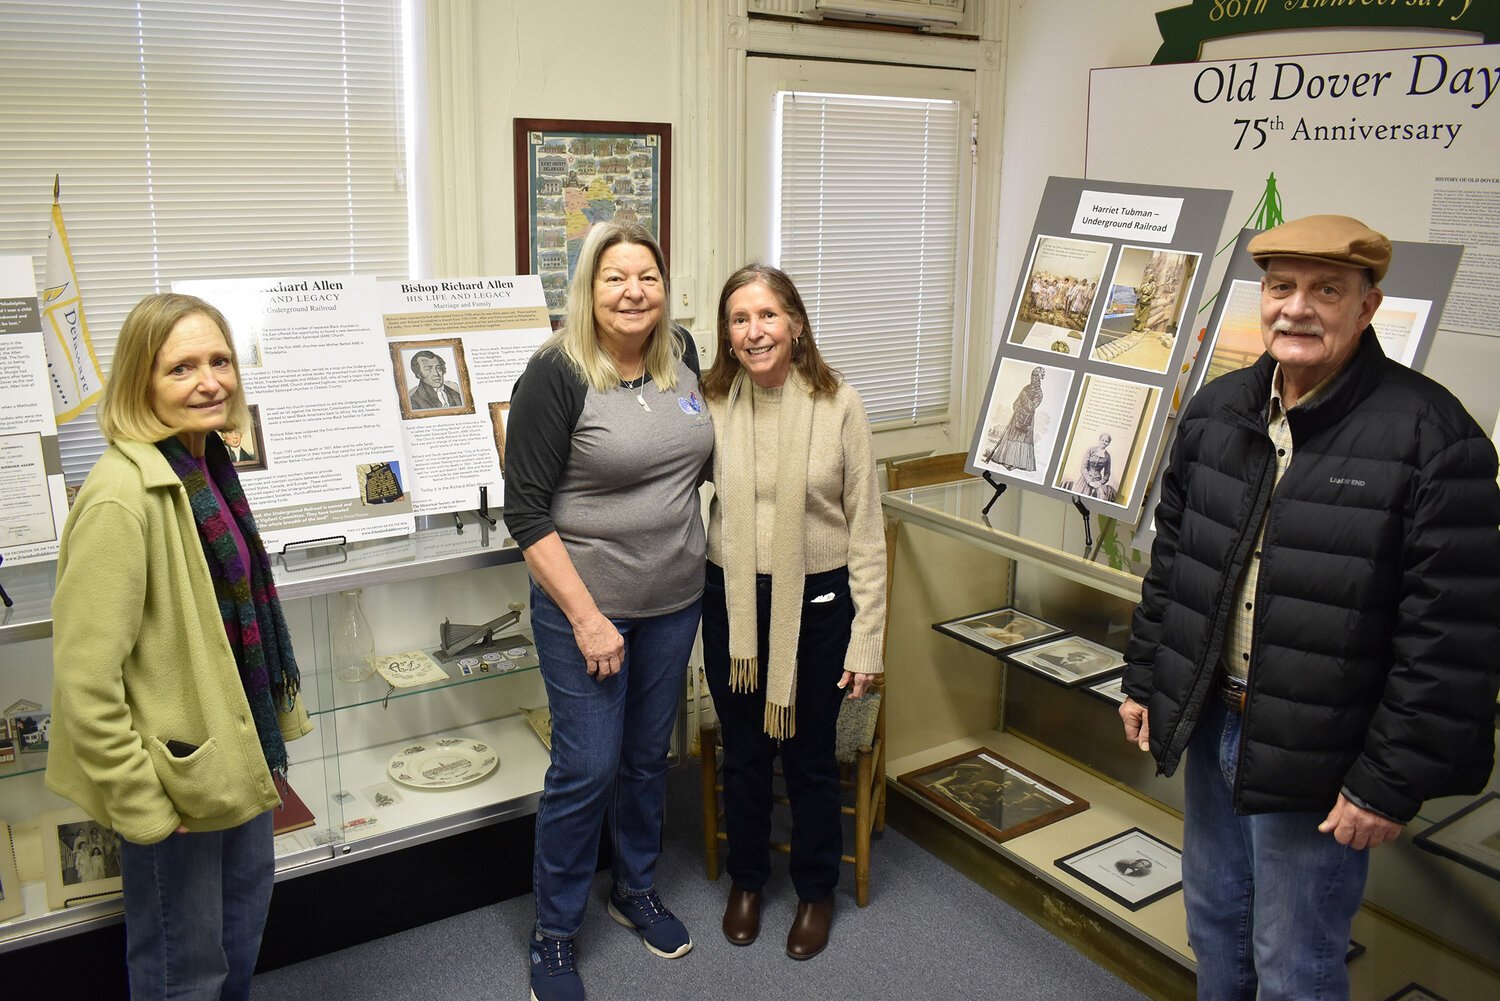 Ann Baker Horsey, Carolyn Forbes, Mary Terry and Tom Smith drop in at The Friends of Old Dover (Historical Society of Dover). Illustrated displays on two individuals who helped people who escaped slavery on the Underground Railroad: conductor Harriet Tubman and Richard Allen, bishop of the AME Church.